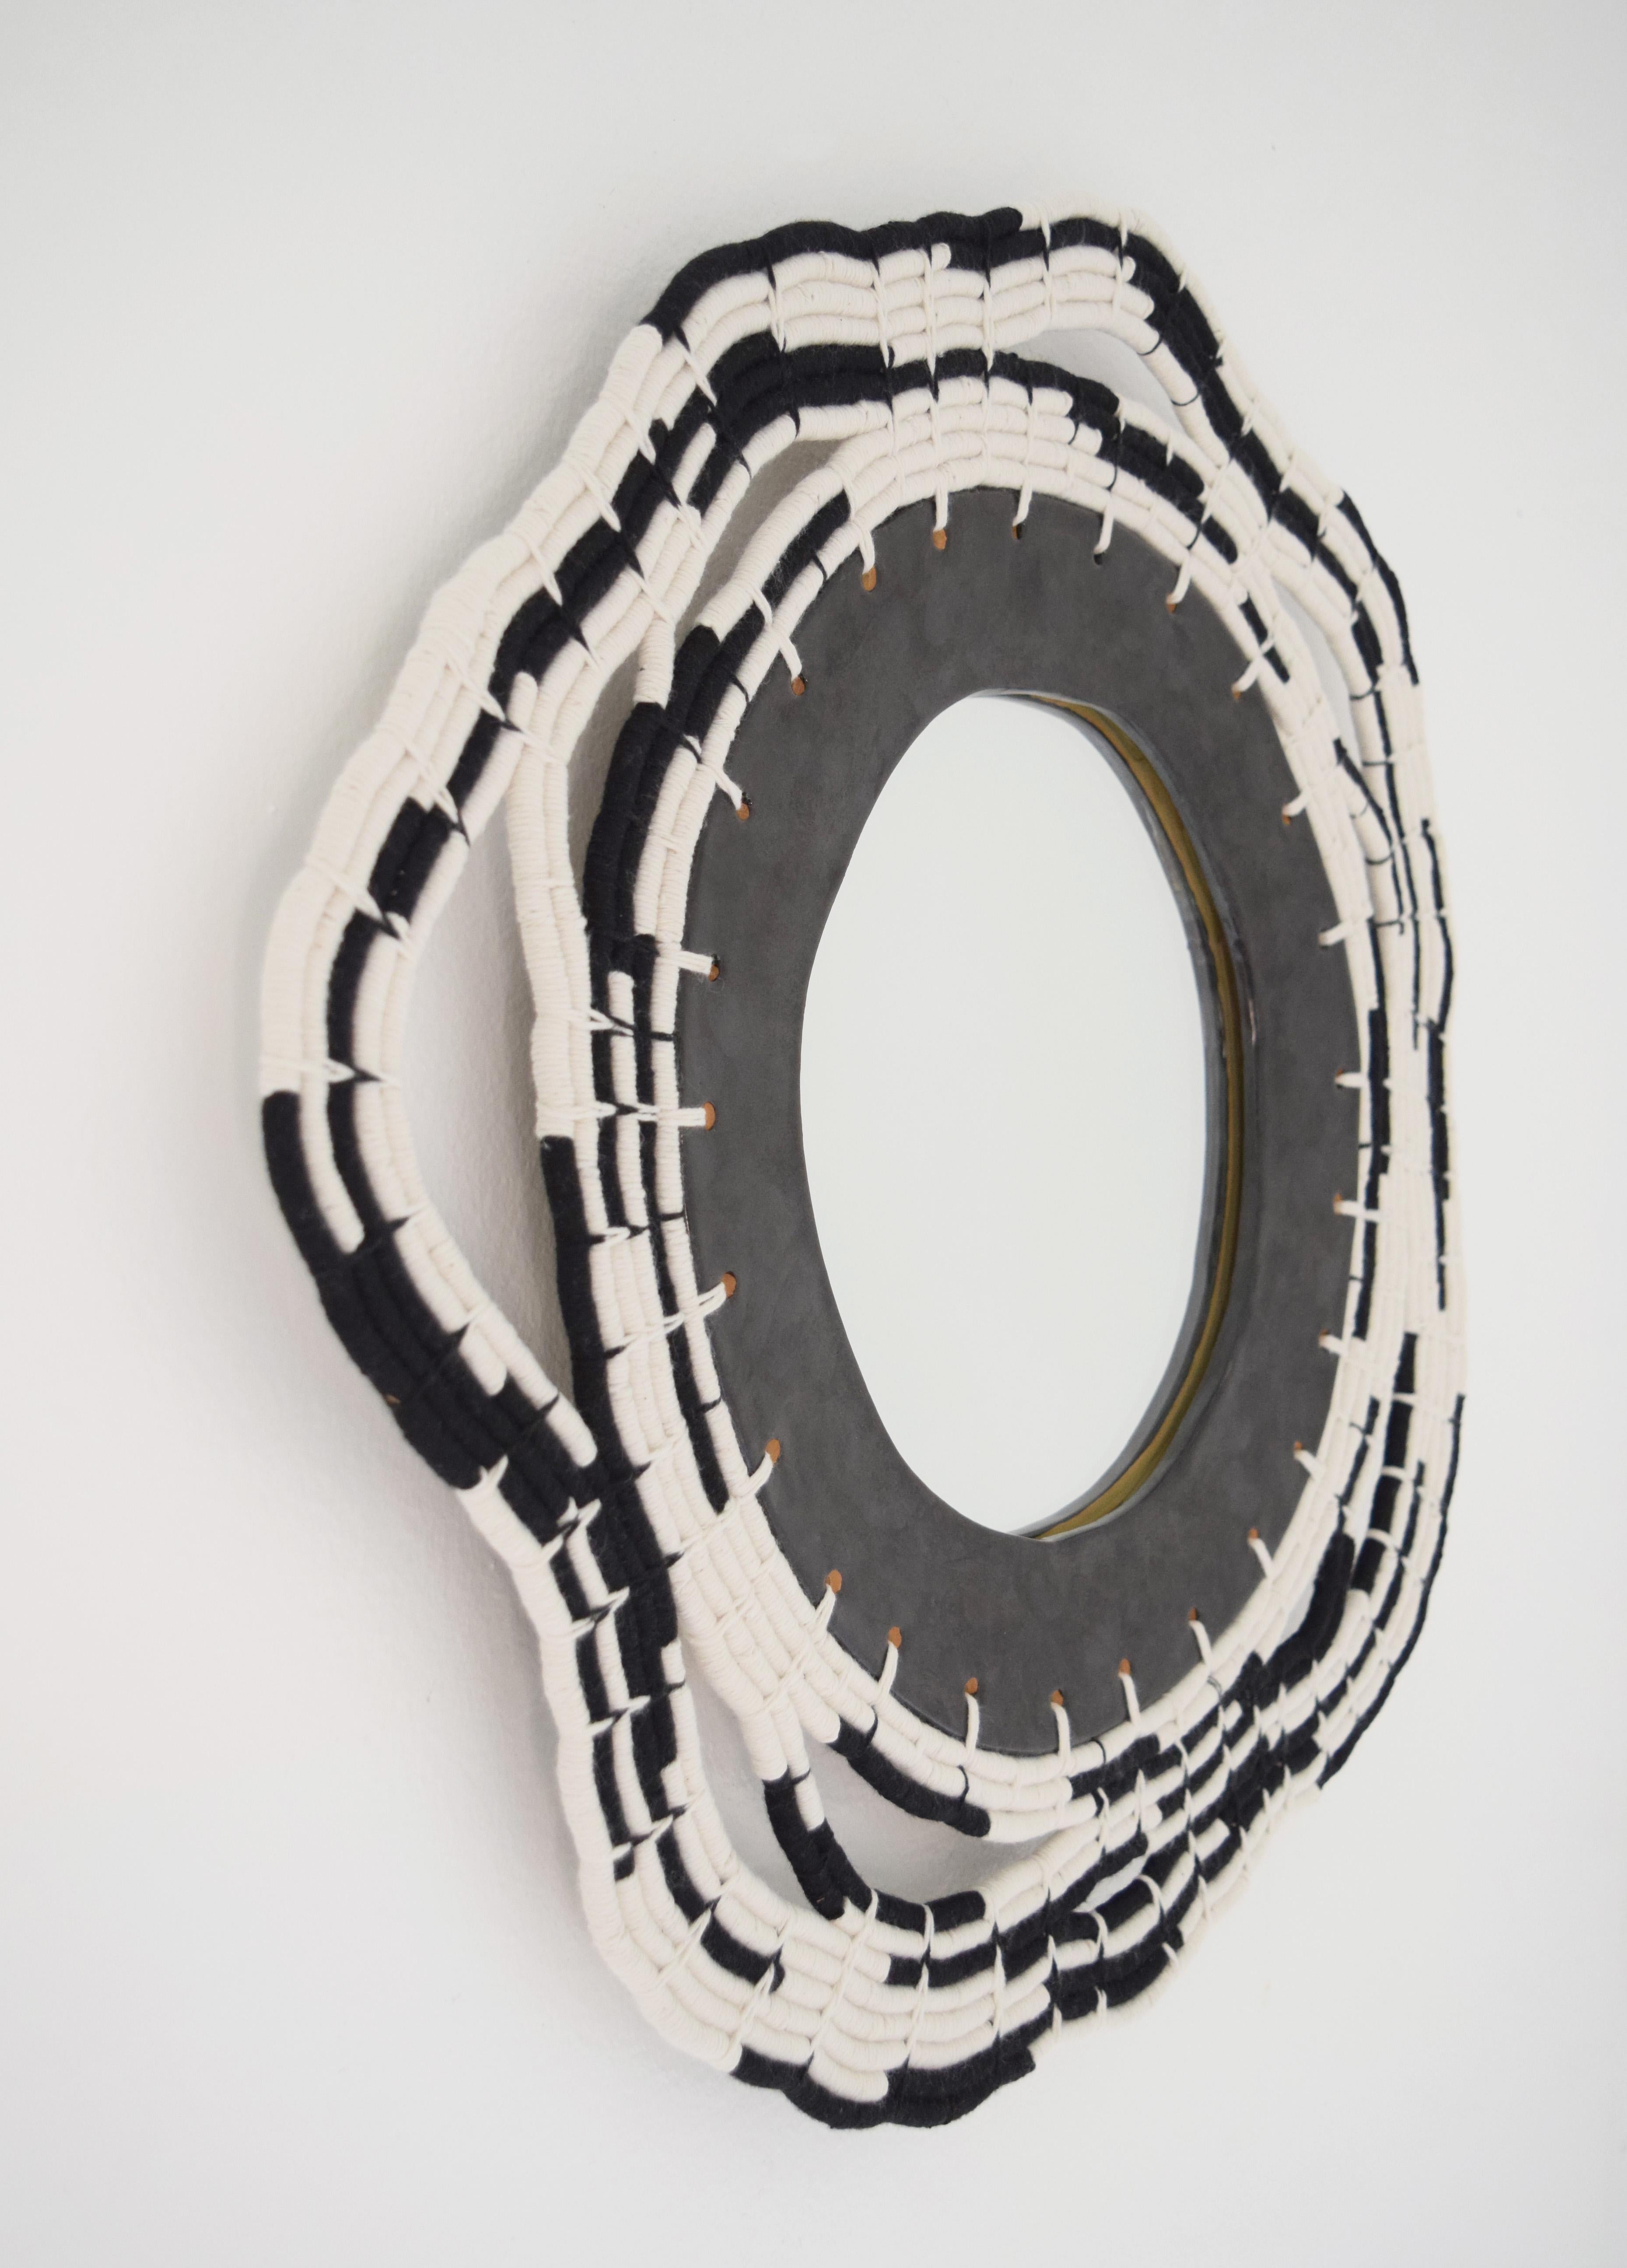 One of a kind mirror #713 by Karen Gayle Tinney.

Decorative mirror with hand formed stoneware frame glazed in satin black. The frame exterior is woven in black and white cotton, using a coiling technique which is a signature technique of the